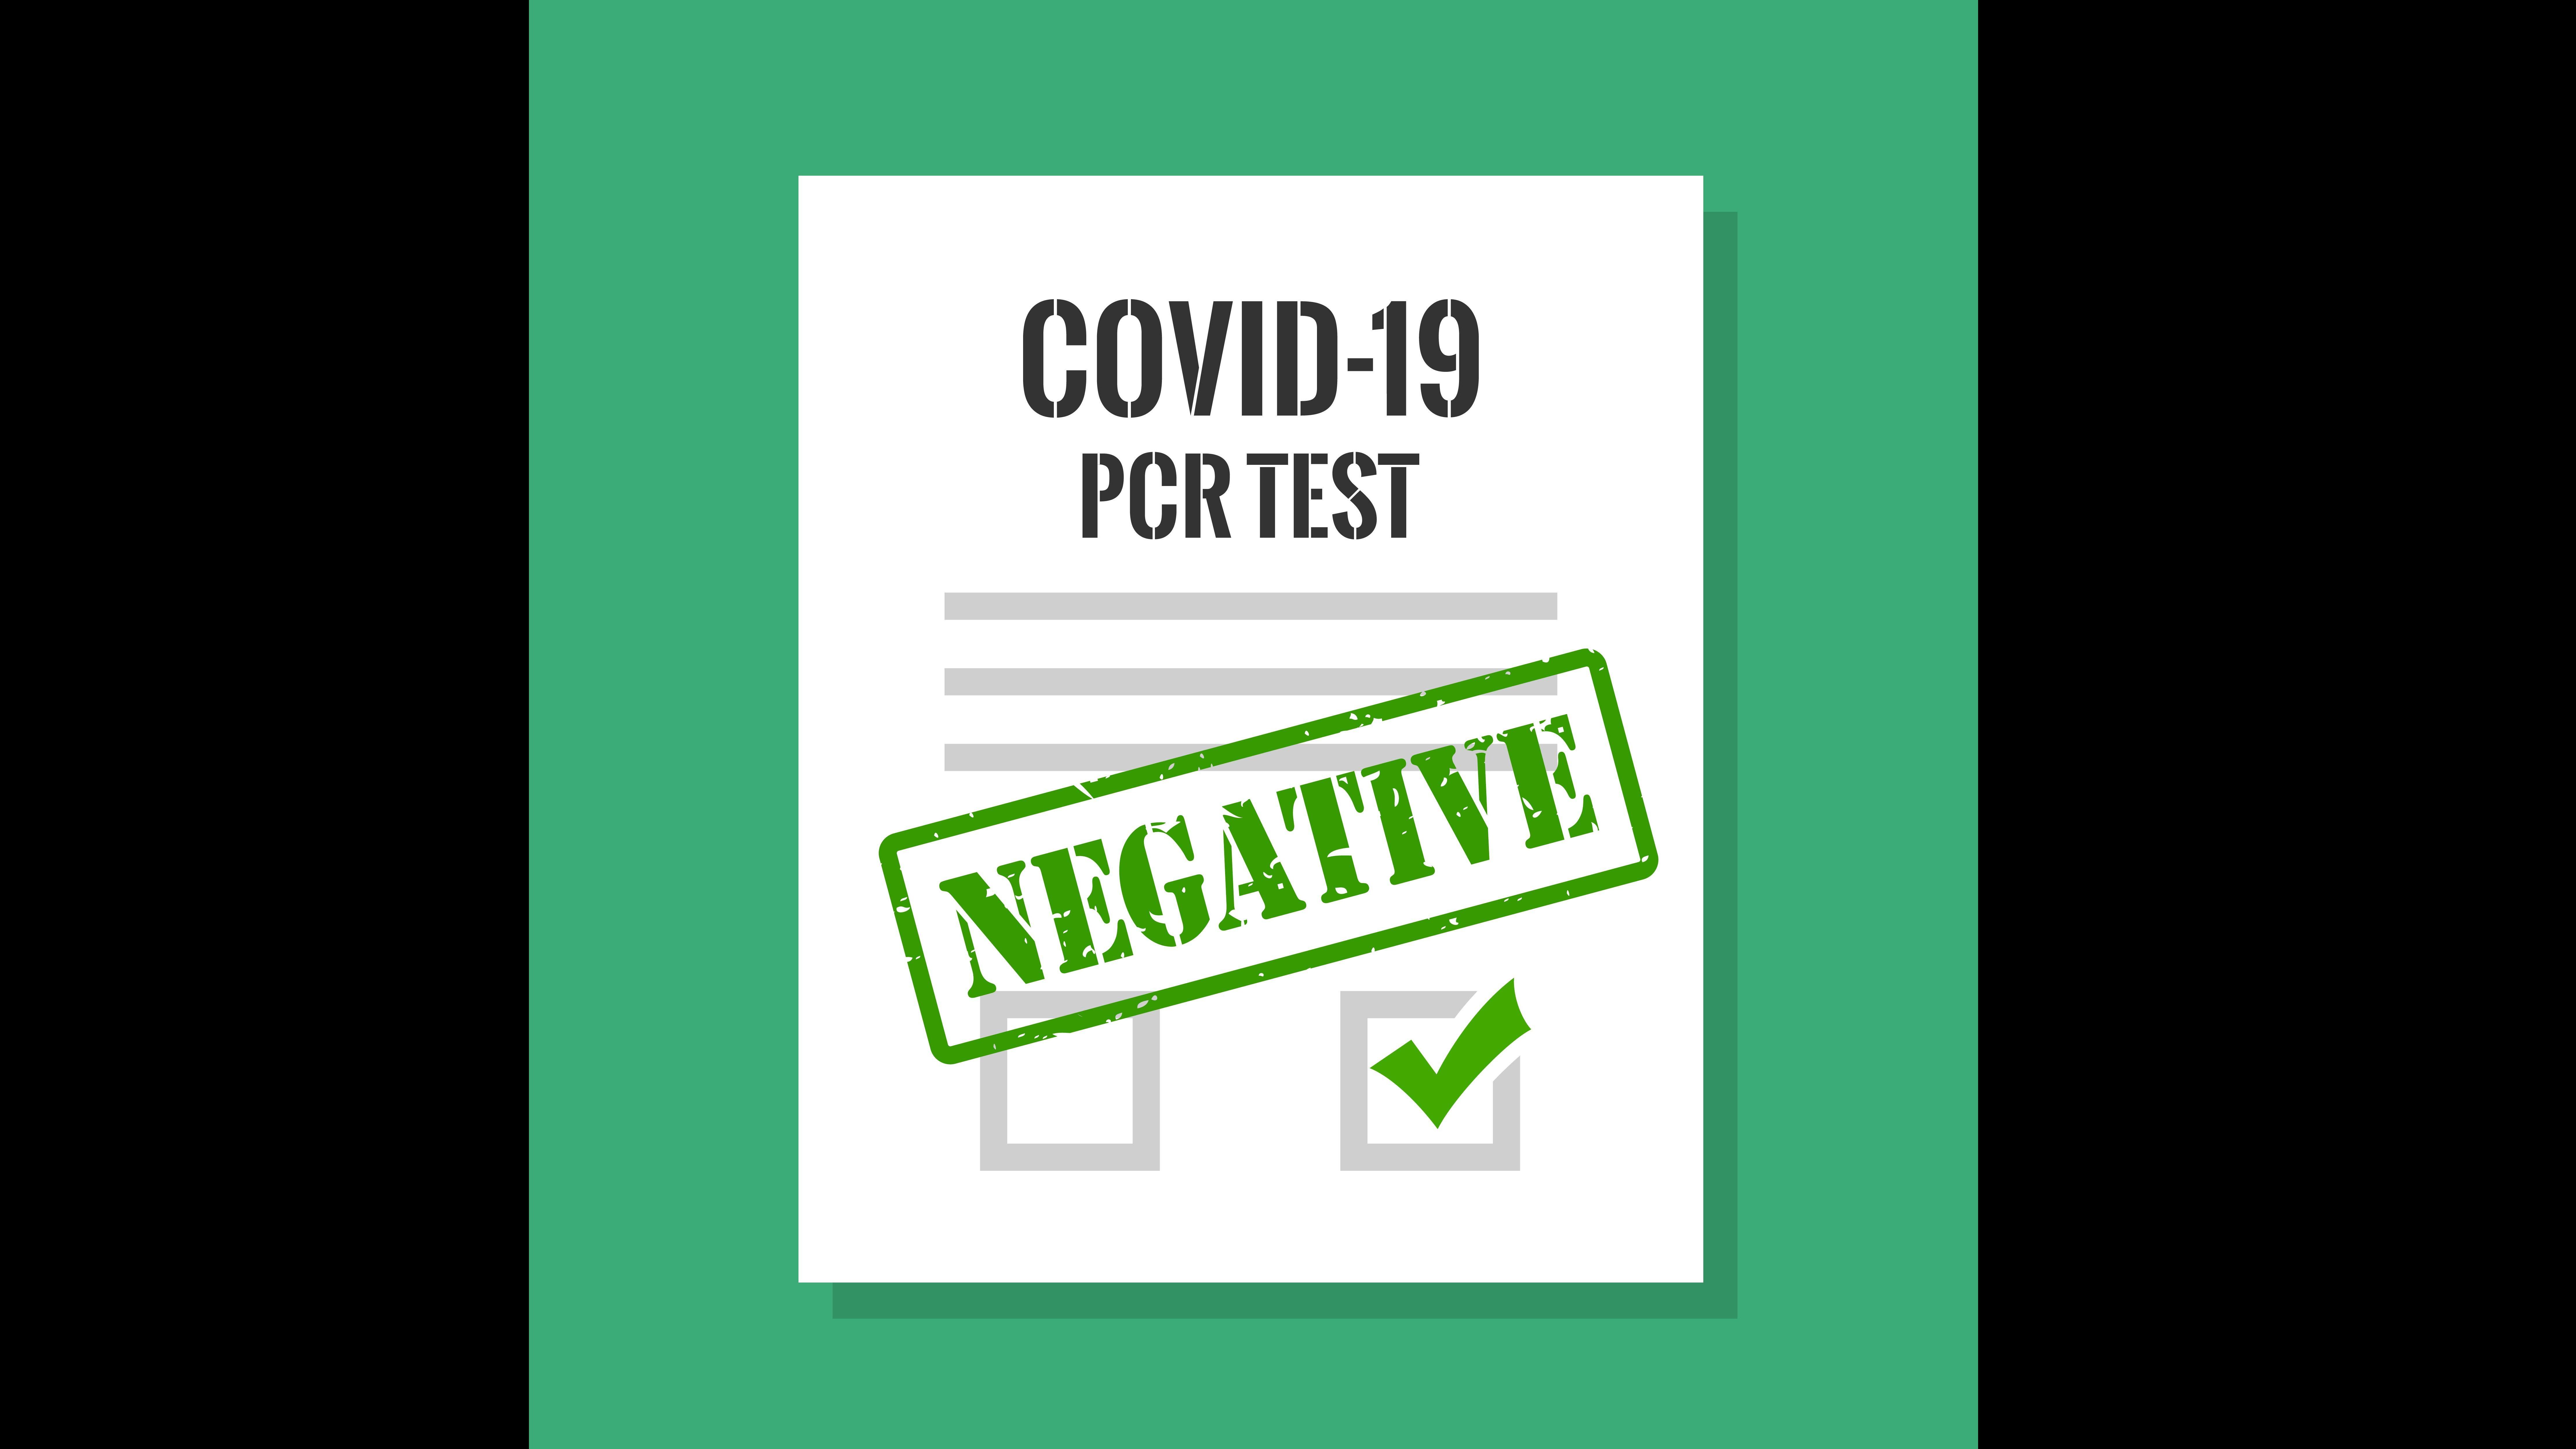 HAVE YOU TESTED NEGATIVE FOR COVID-19? Join Our Study and Help Researchers Learn More About the Long-Term Effects on Cardiovascular and Mental Health!